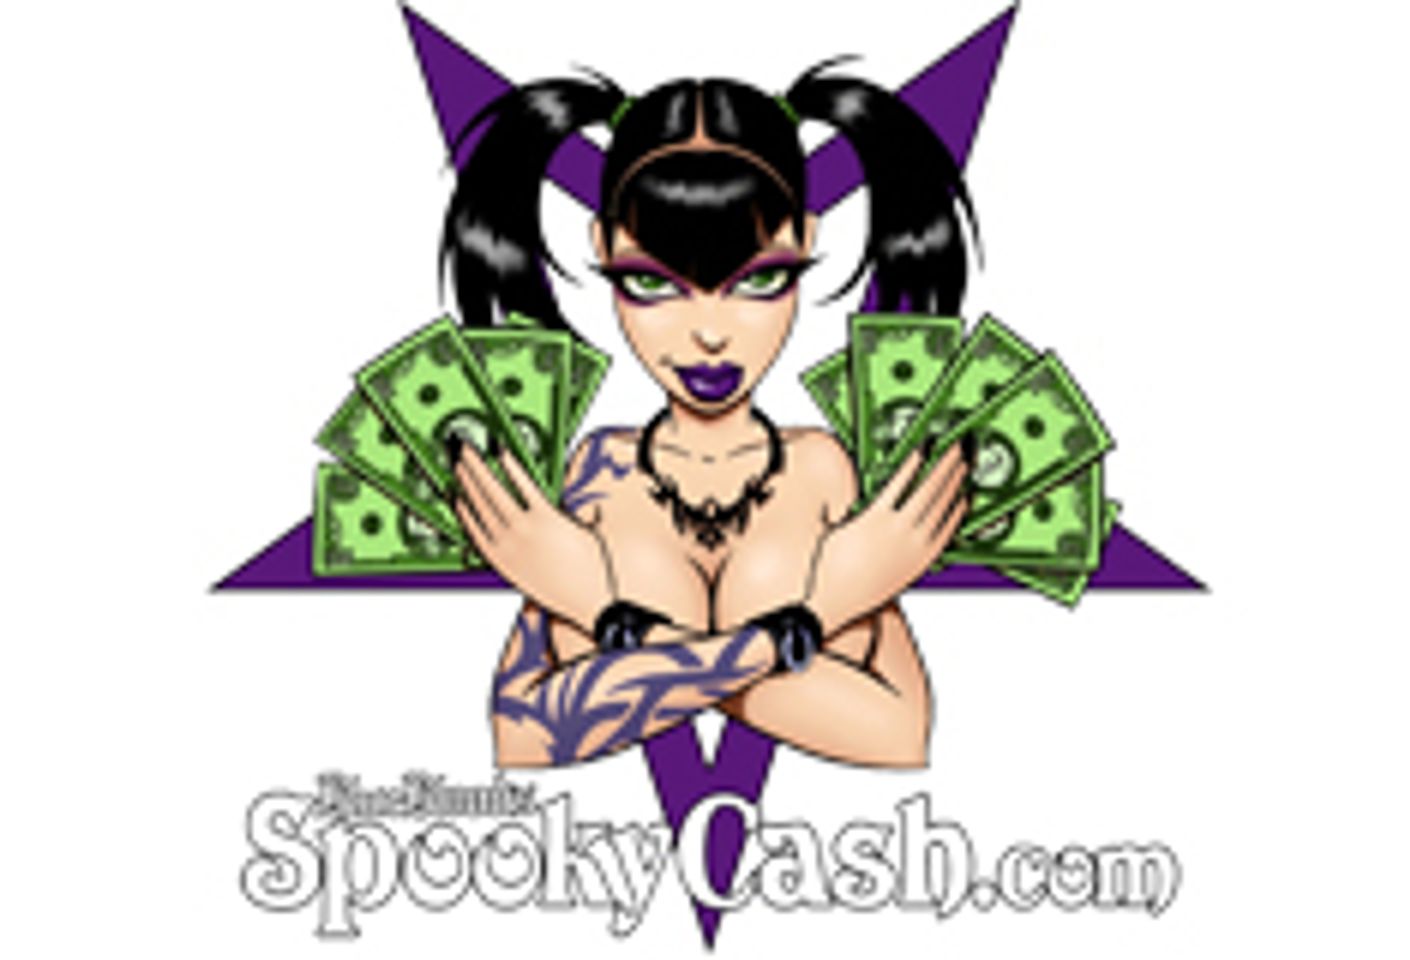 SpookyCash Releases Luck of the Gothic Shamrock Babe Promo Content